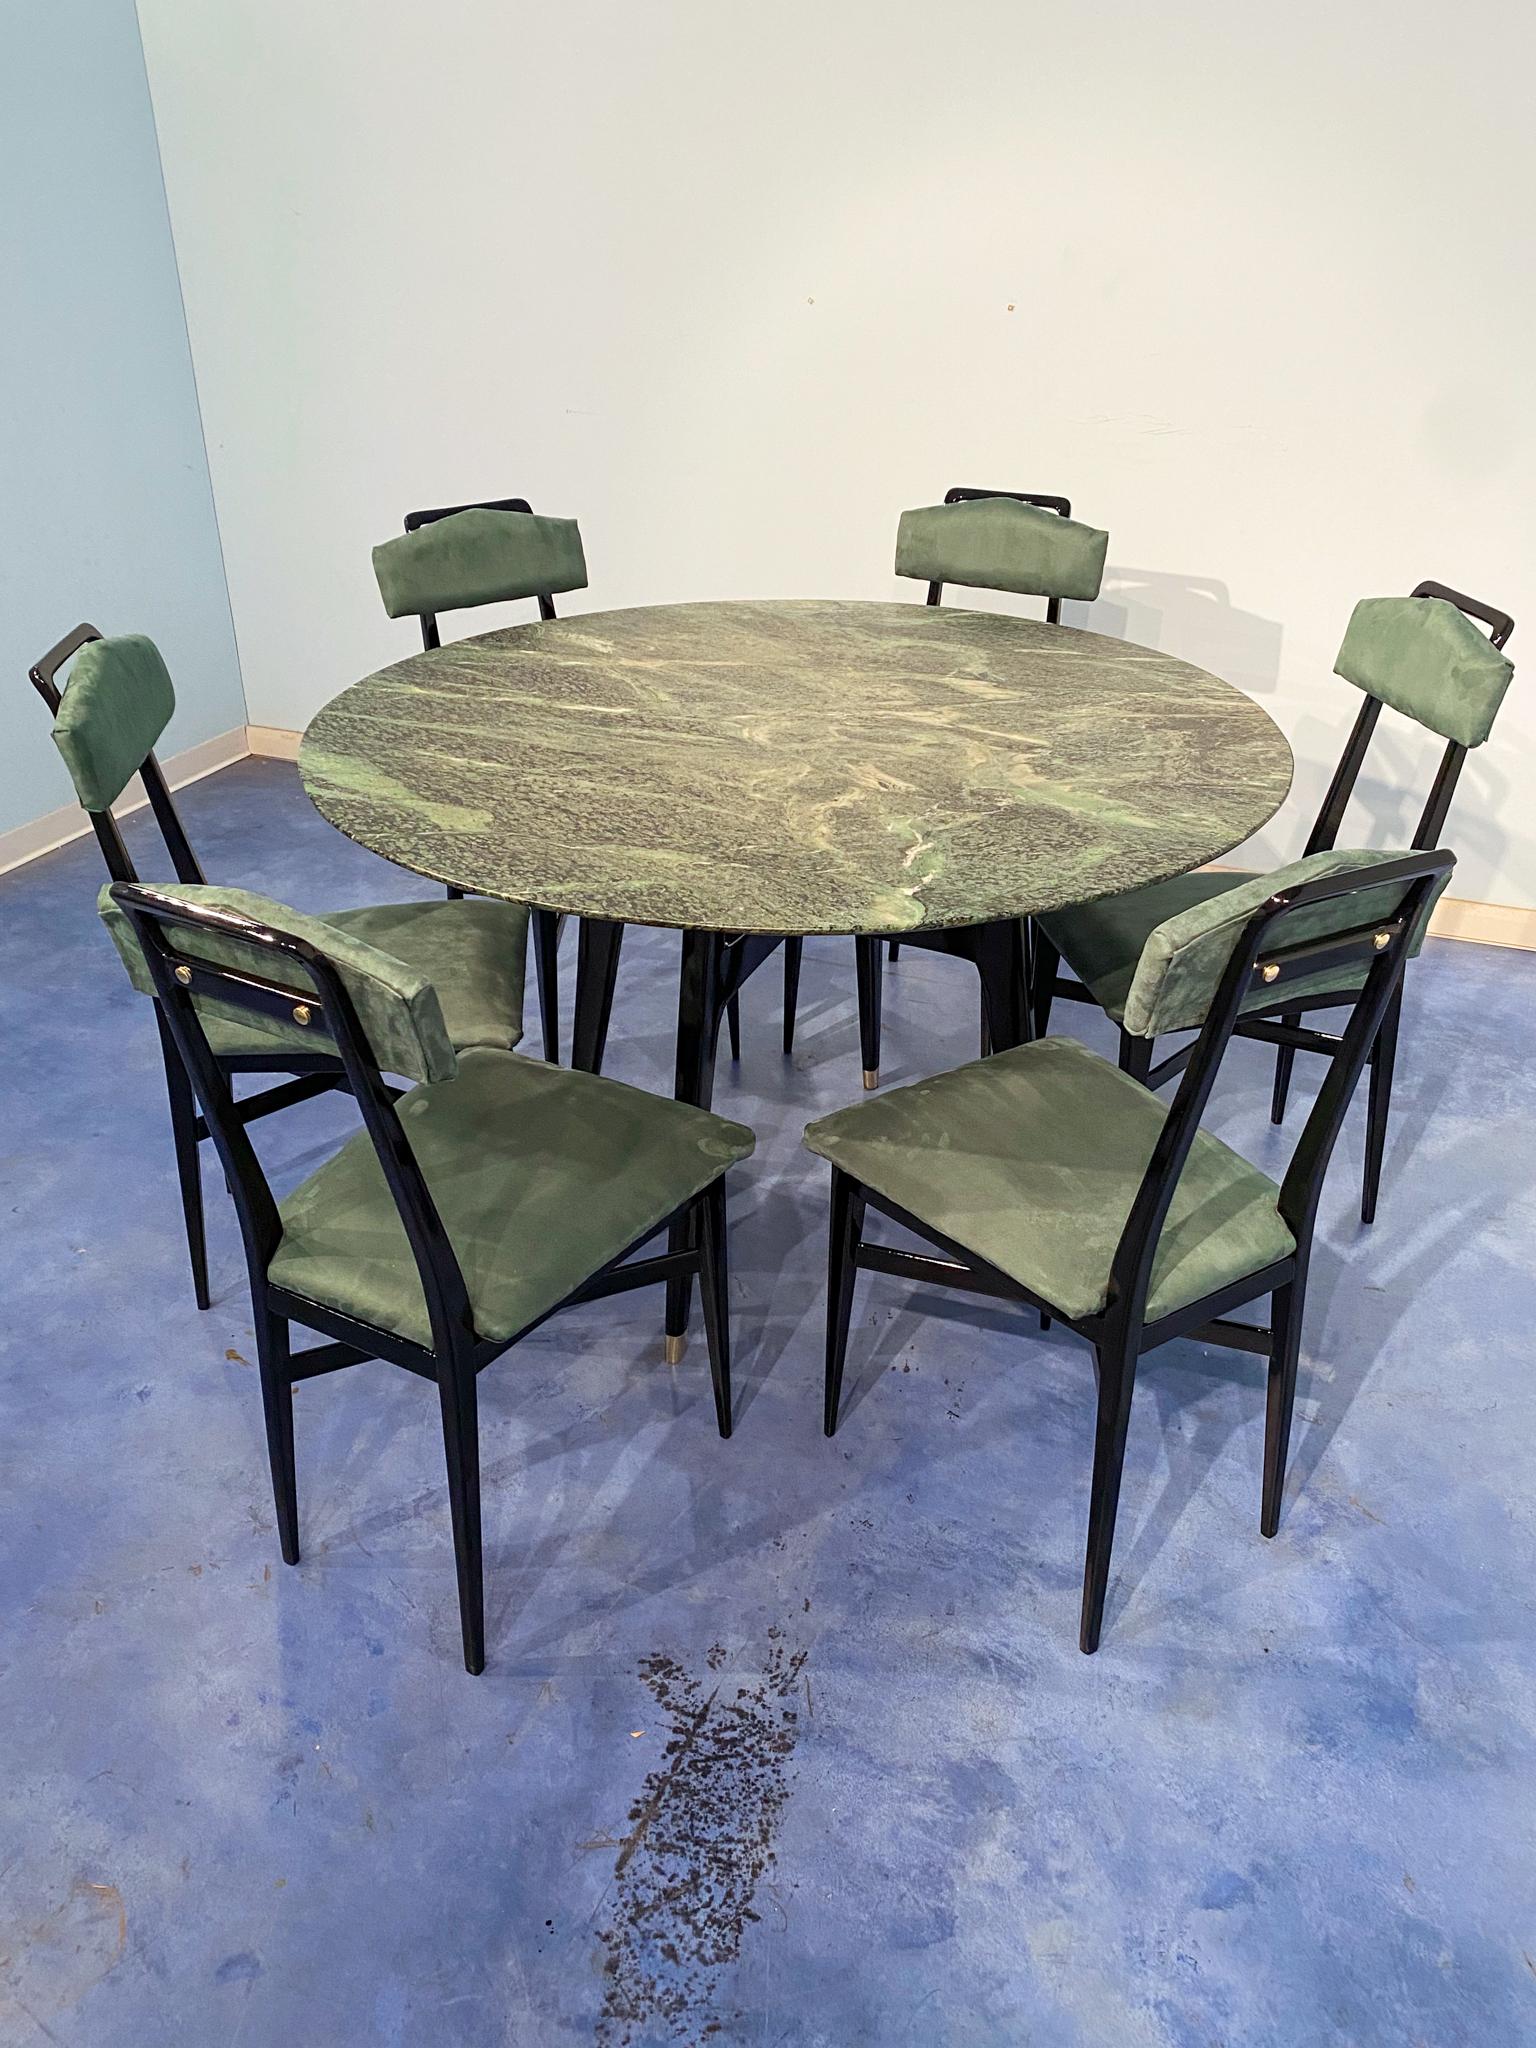 This stylish mid-century round marble center table is a stunning example of 1950s Italian design. The top is crafted from precious green marble from the Alps. The black lacquered walnut base, the original cross support at the center, and refined